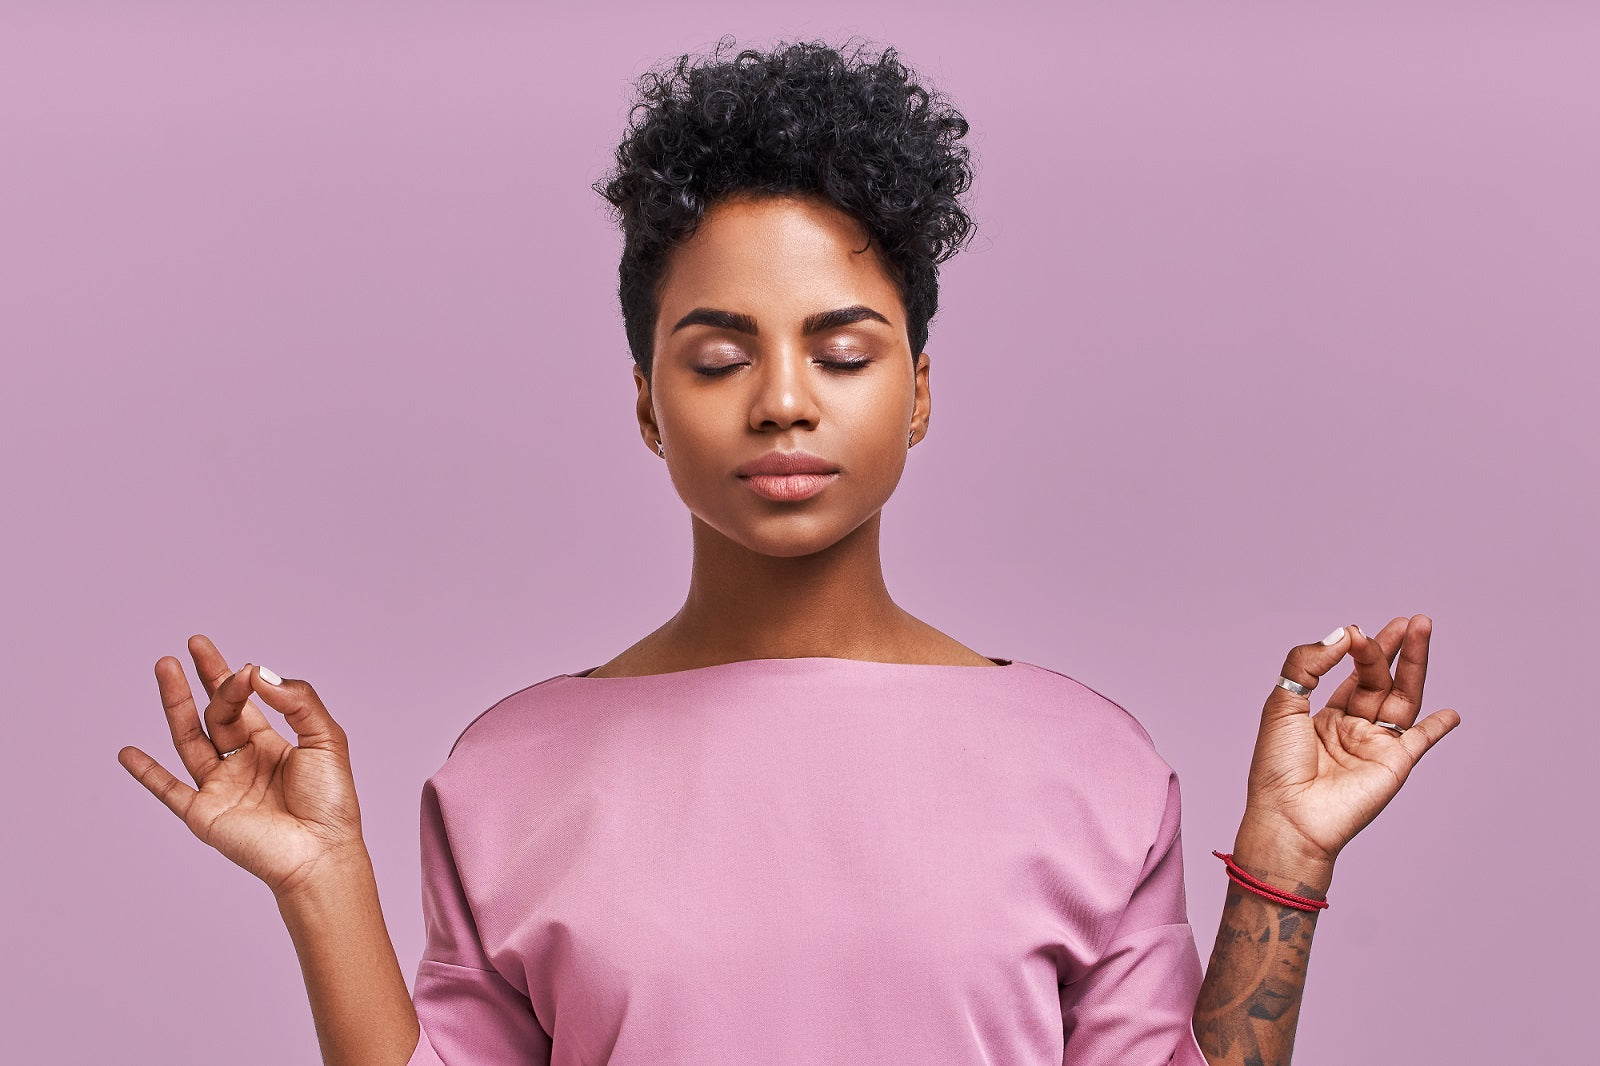 woman meditating in a pink shirt on a matching pink background